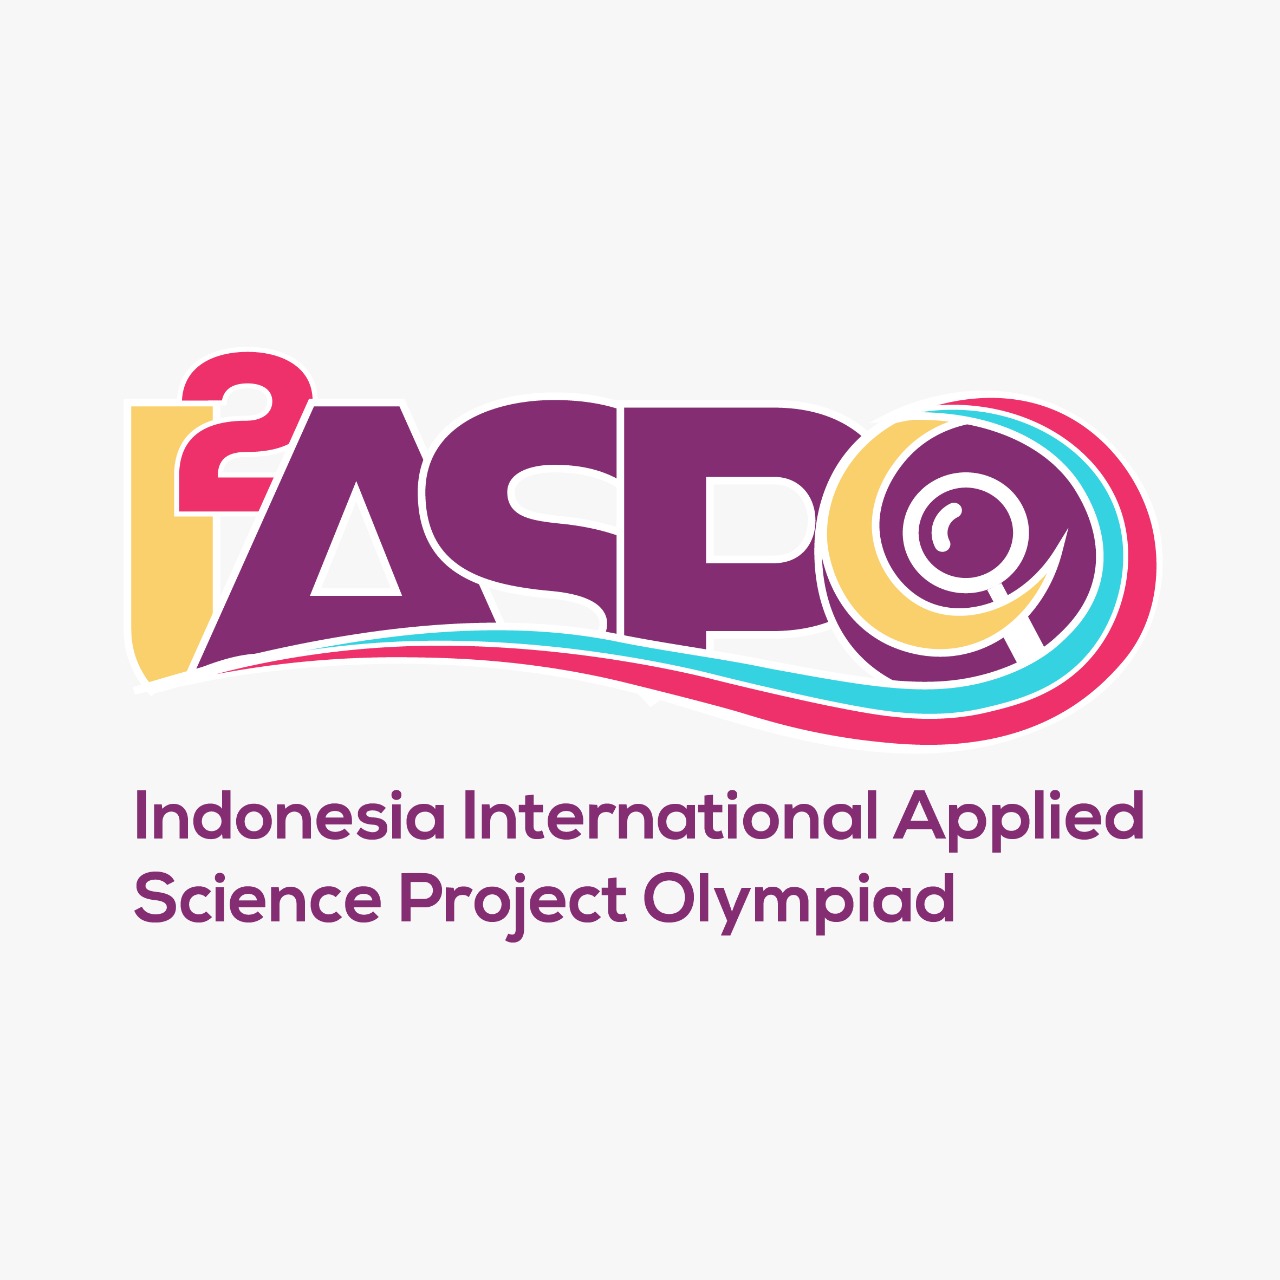 Indonesia International Applied Science Project Olympiad